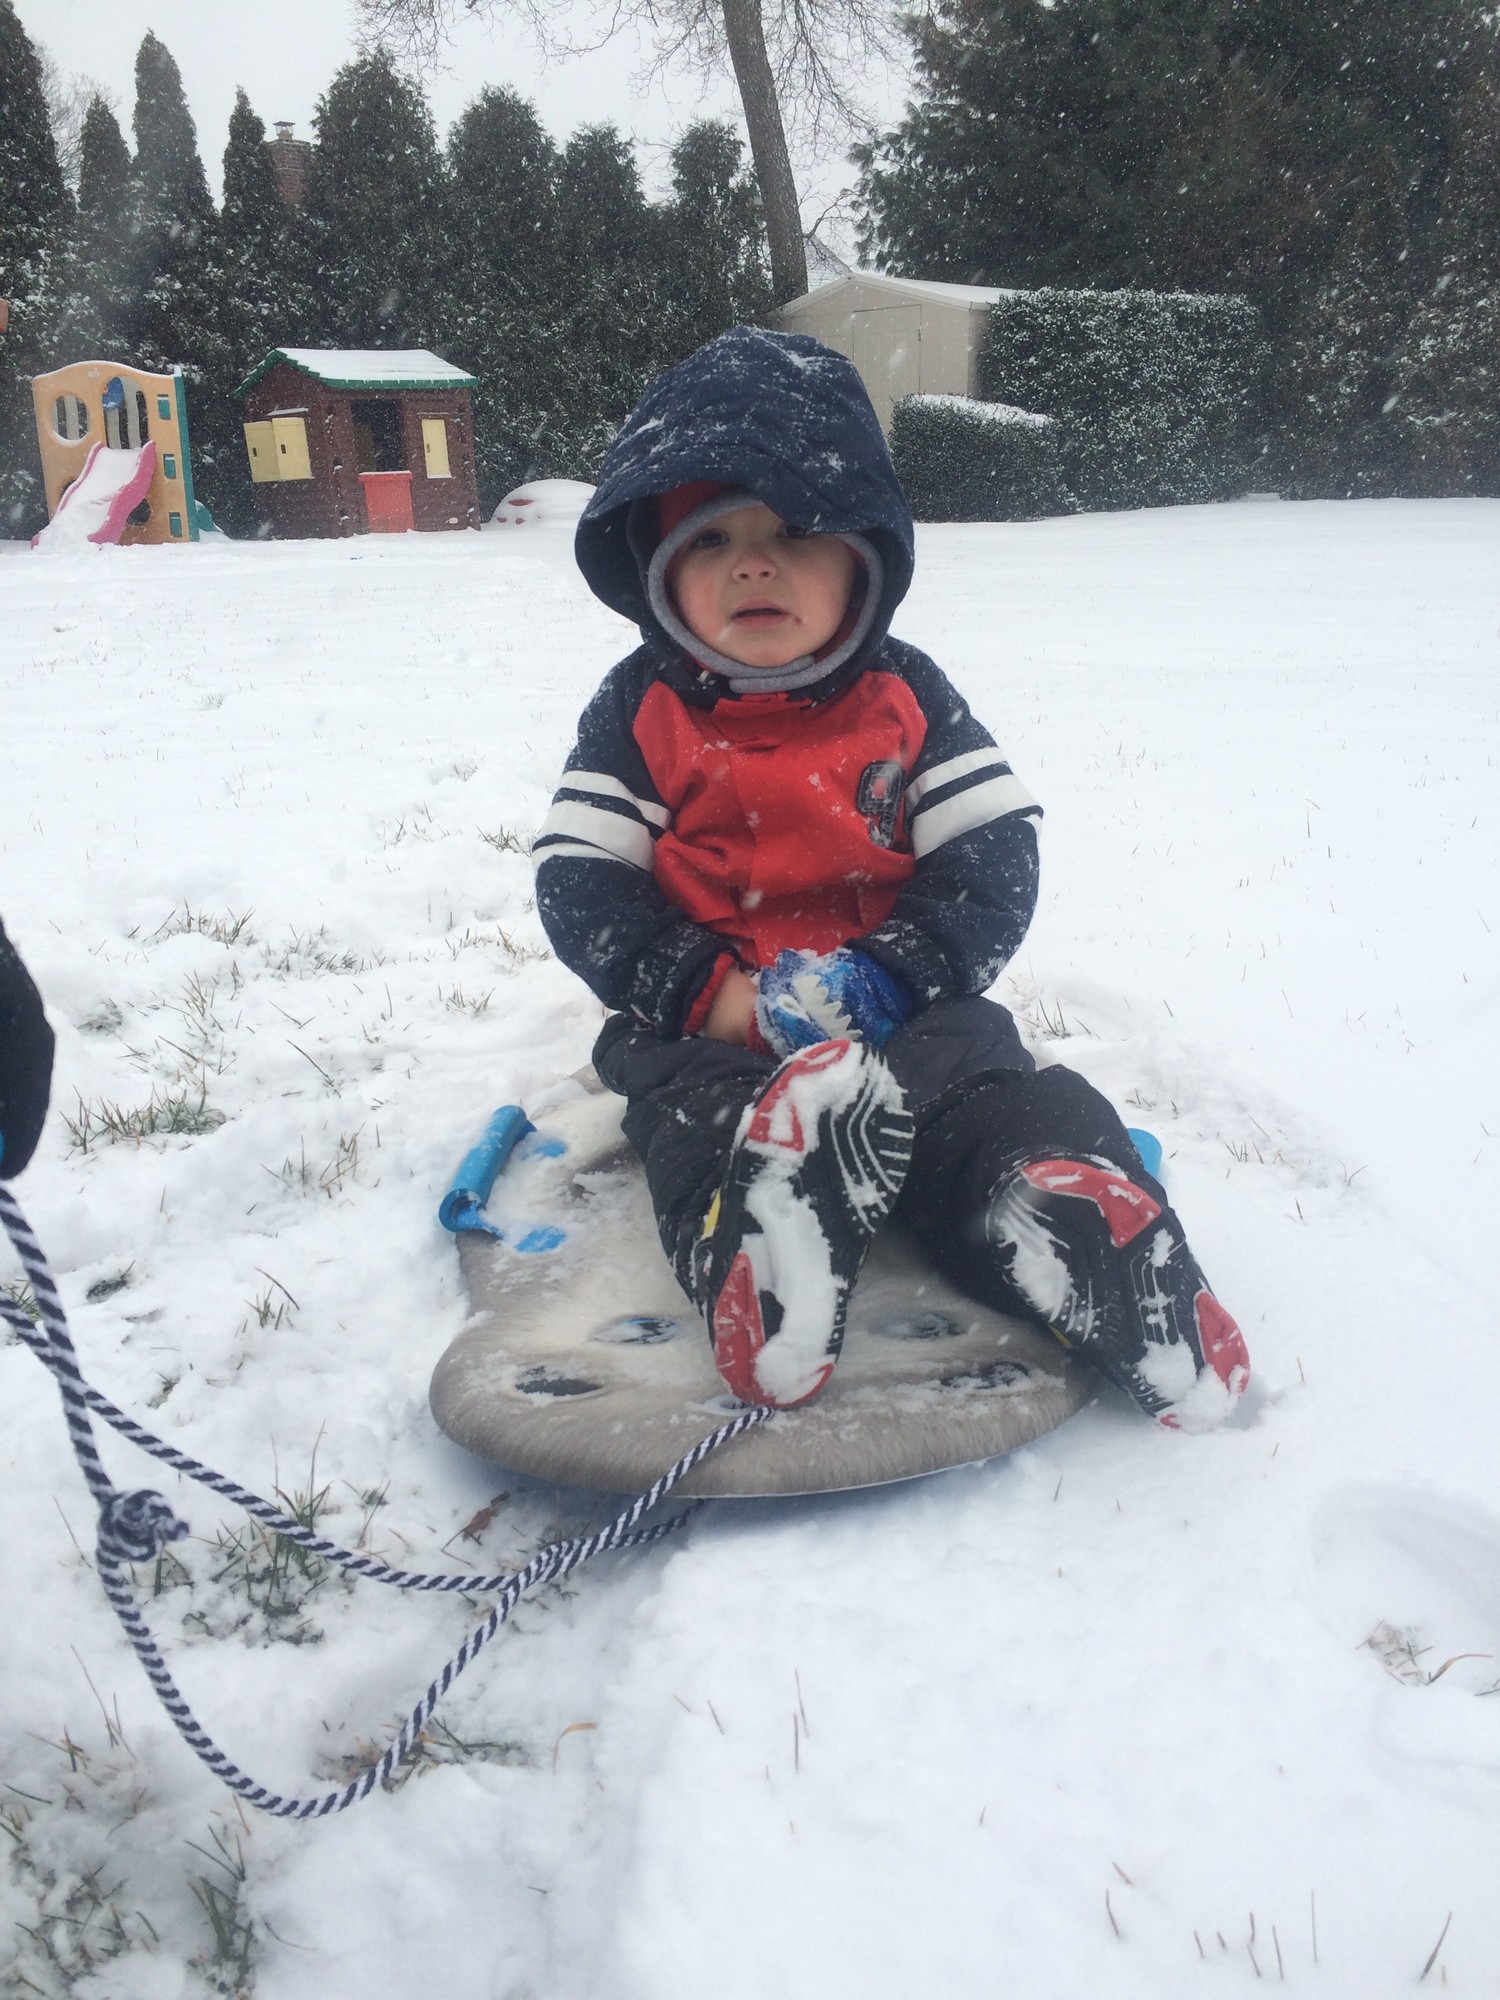 Liam Fullerton of Wantagh enjoyed the early stages of the snowstorm.